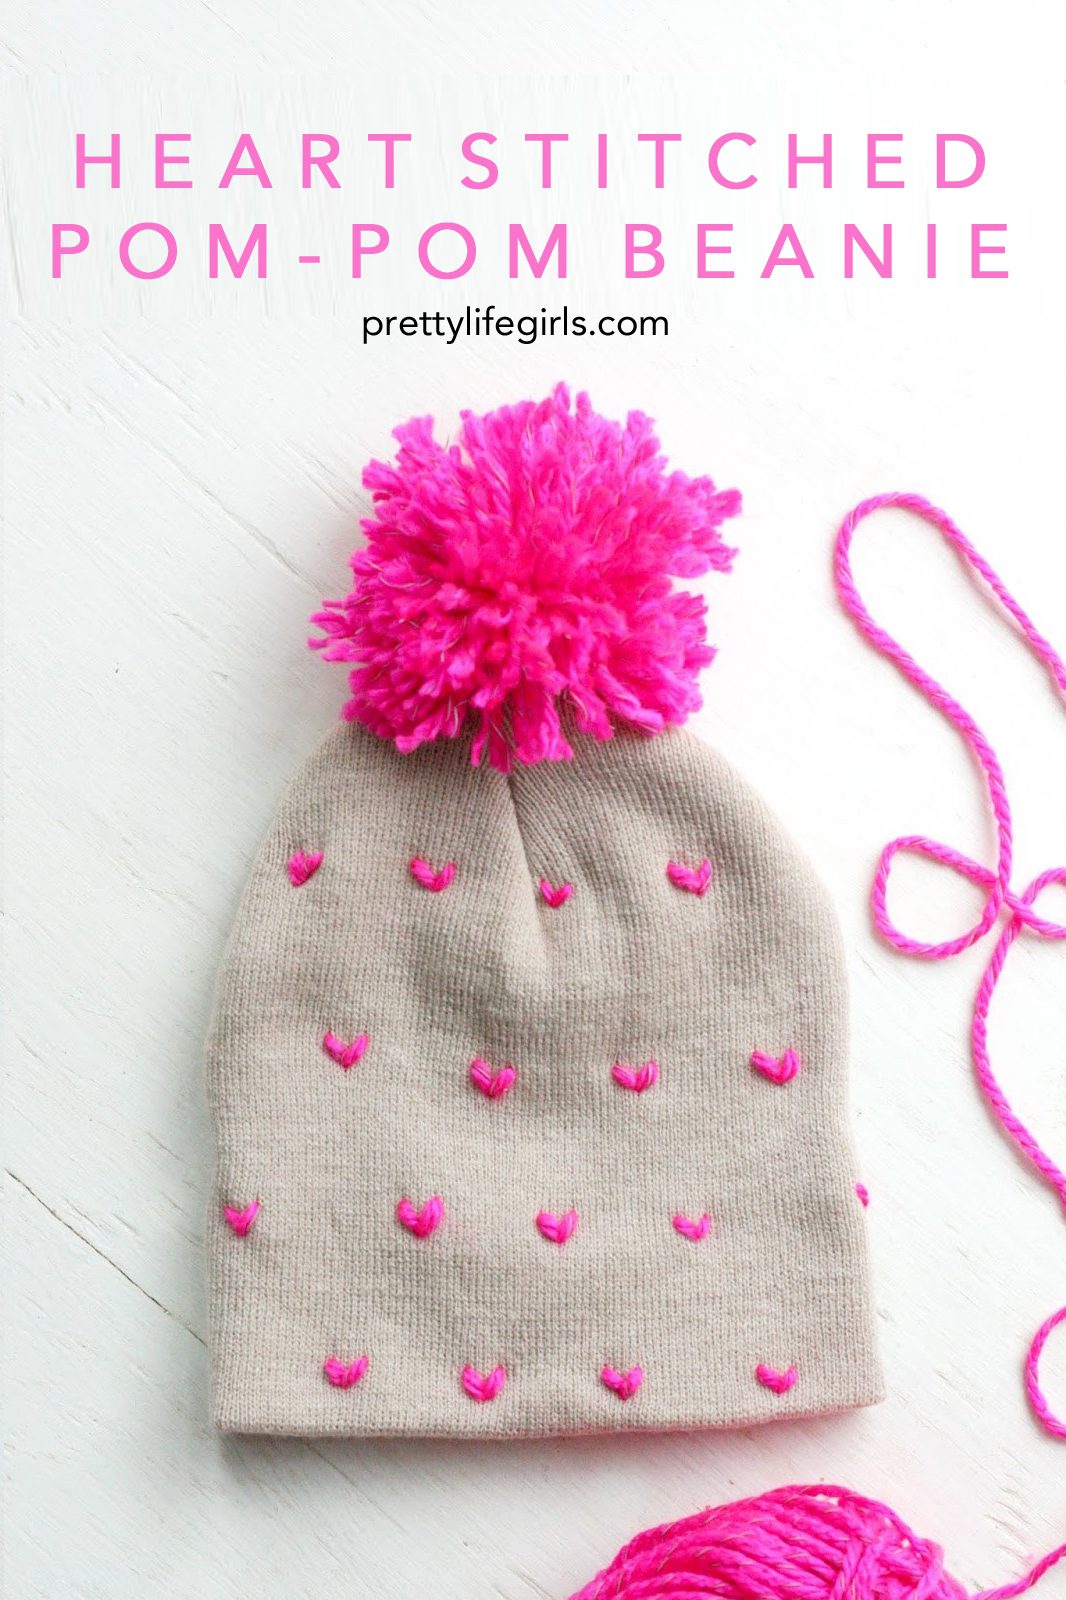 15 Lovely Handmade Valentine Gifts + featured by Top US Craft Blog + The Pretty Life Girls: + DIY Heart-Patterned Pom Pom Beanie